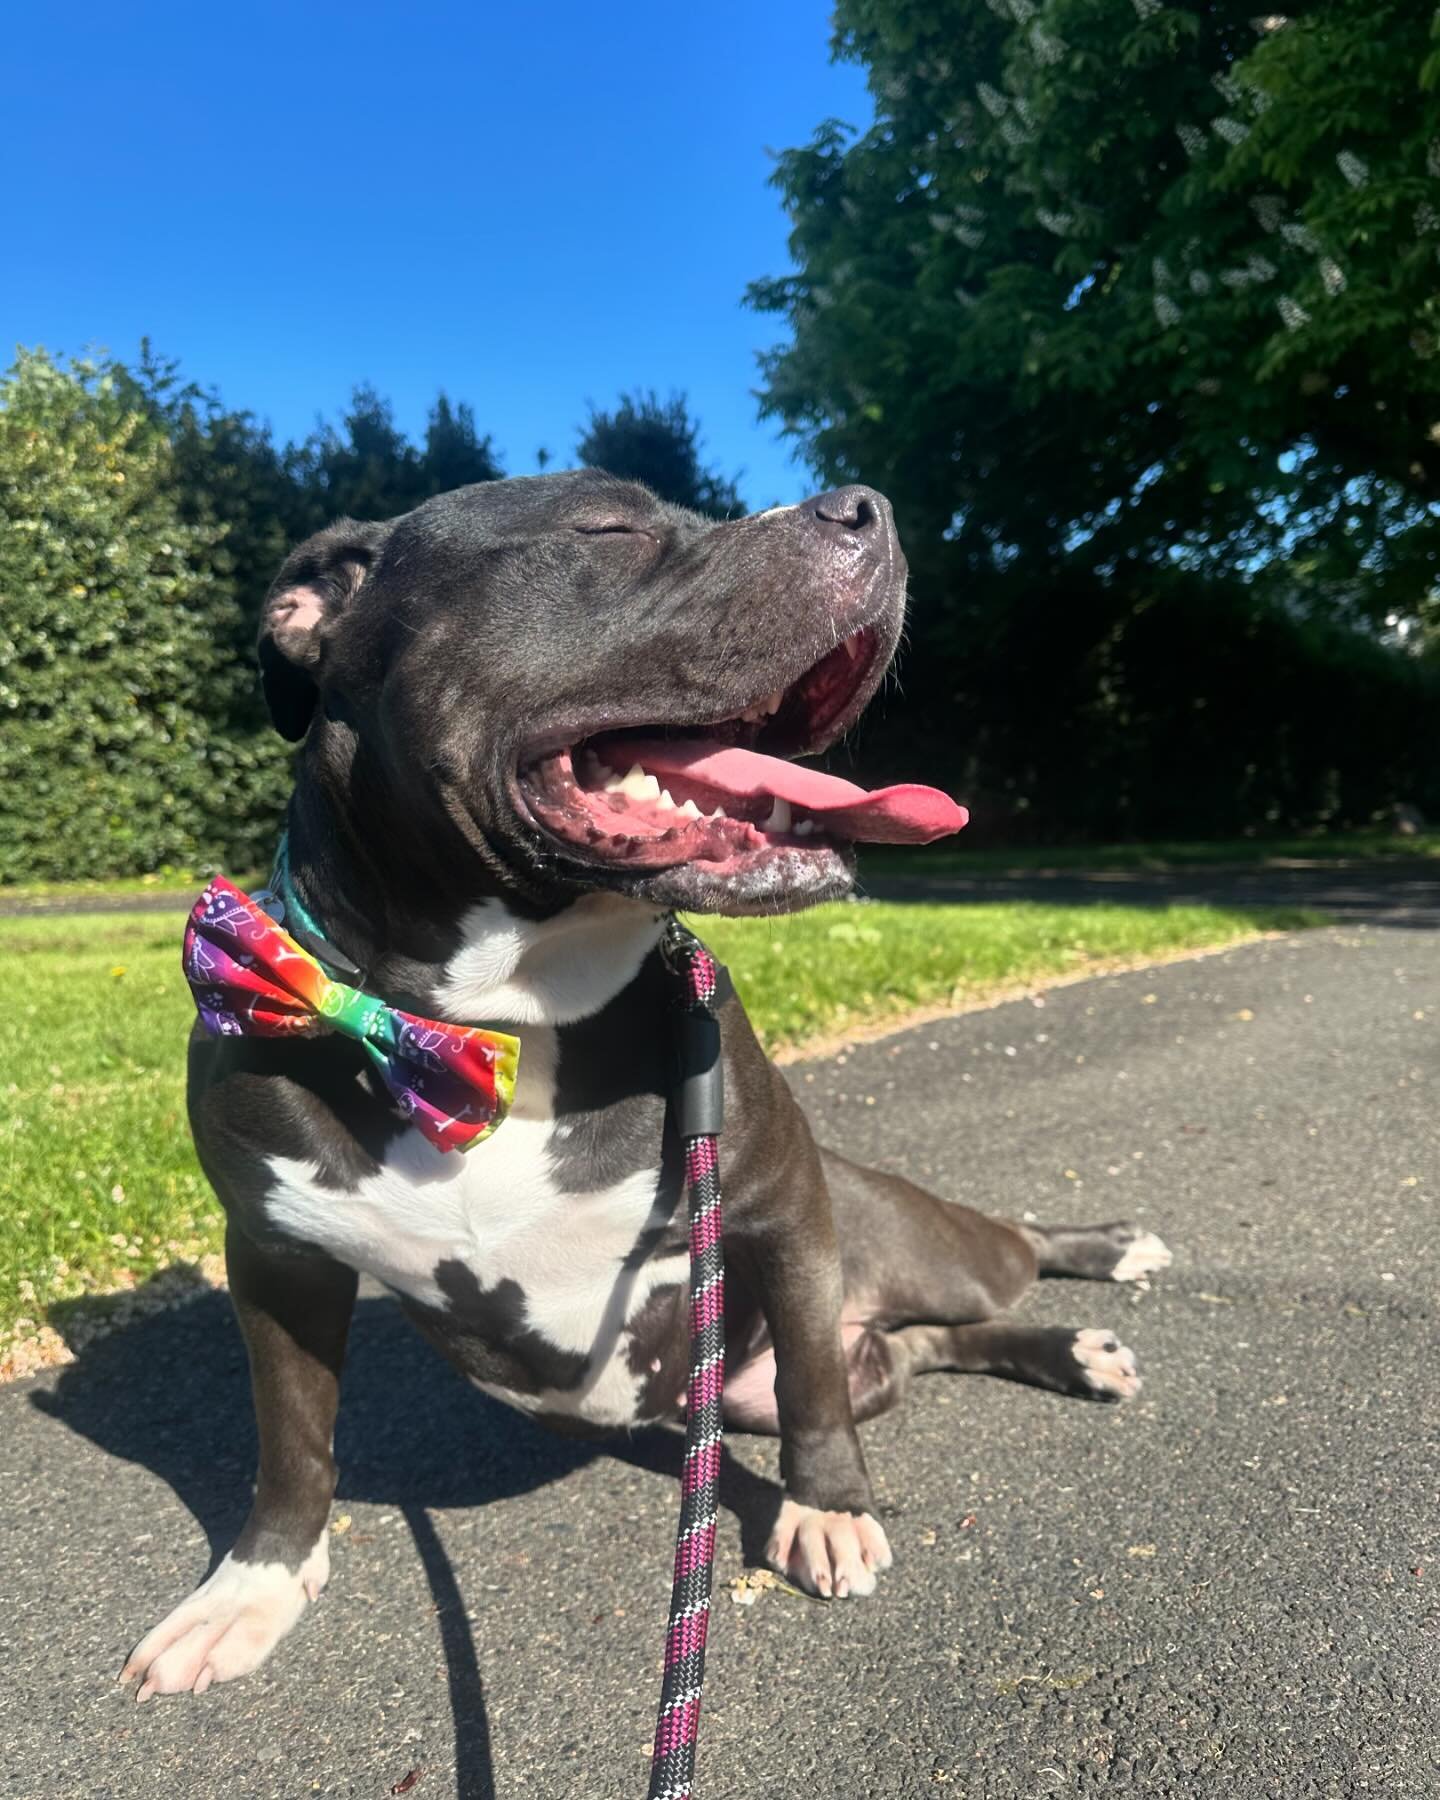 Want to beat the heat? Sign your pup up for a nature hike, or bring them to either of our temperature controlled locations for some daycare! Annabelle is having a blast getting out and about with us! #dogs #dogsofinstagram #dogsofpdx #dogsofportland 